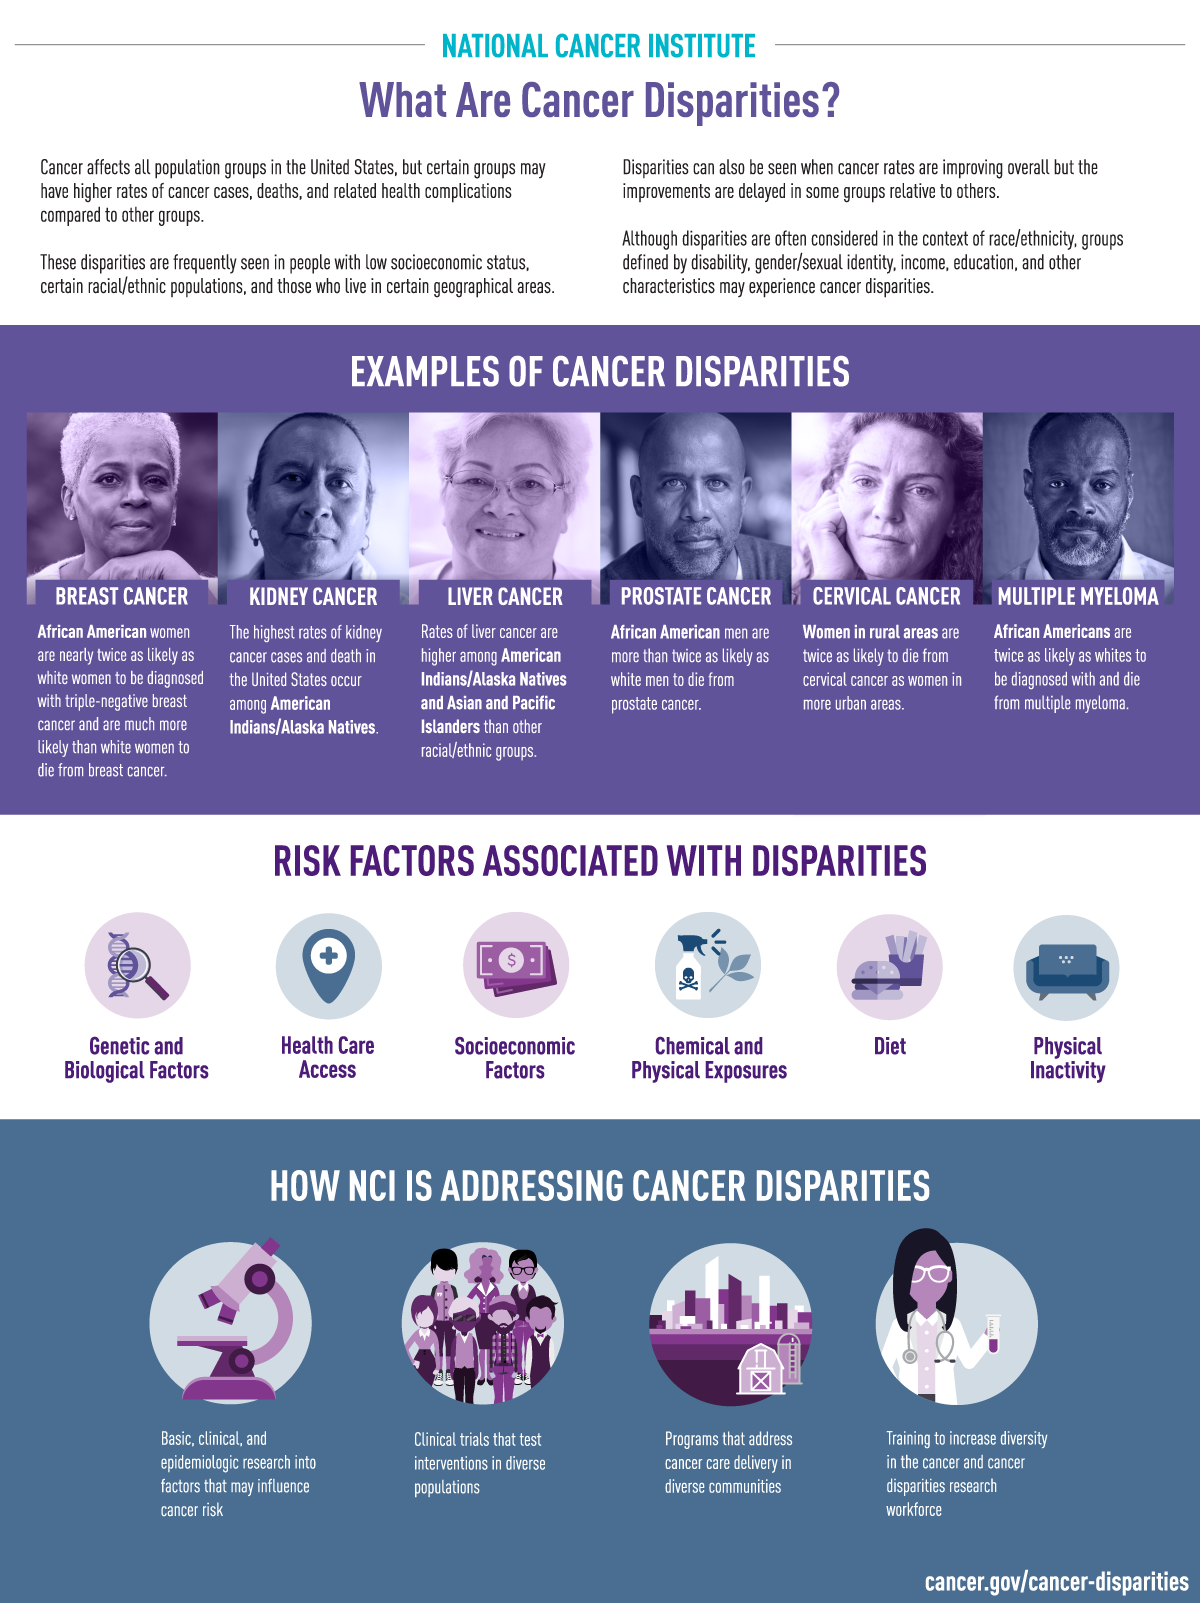 An infographic from the National Cancer Institute that explains cancer disparities